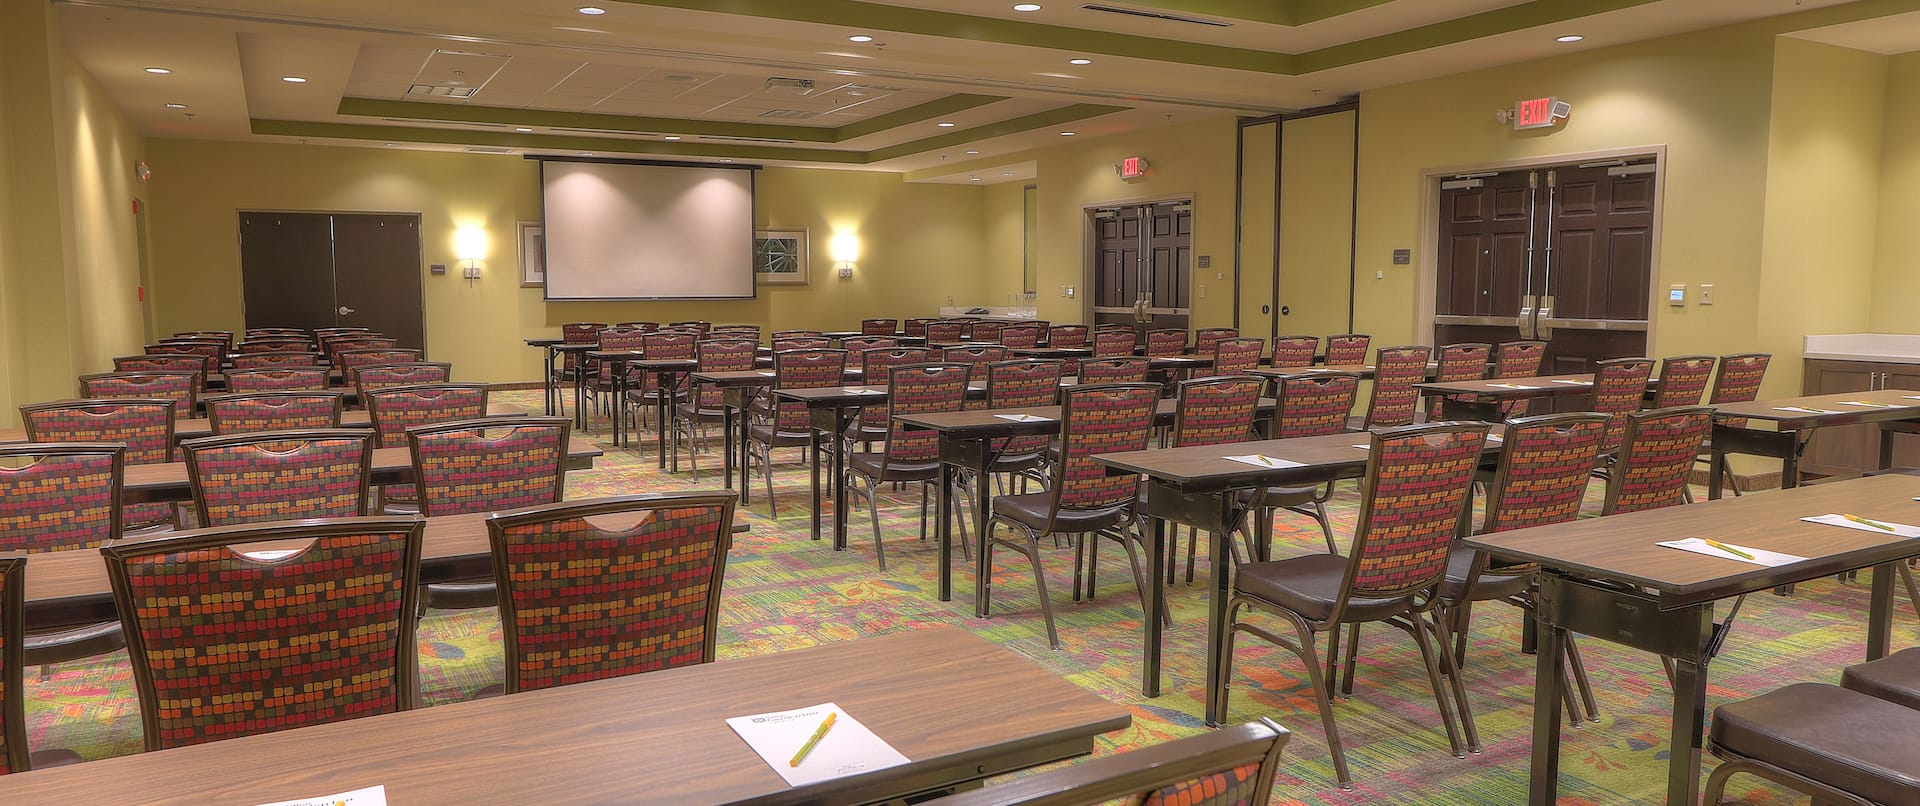 Classroom Setup in Meeting Room With Notepads and Pens on Tables, Chairs, Presentation Screen, Overhead Projector, Wall Art, and Entry Doors